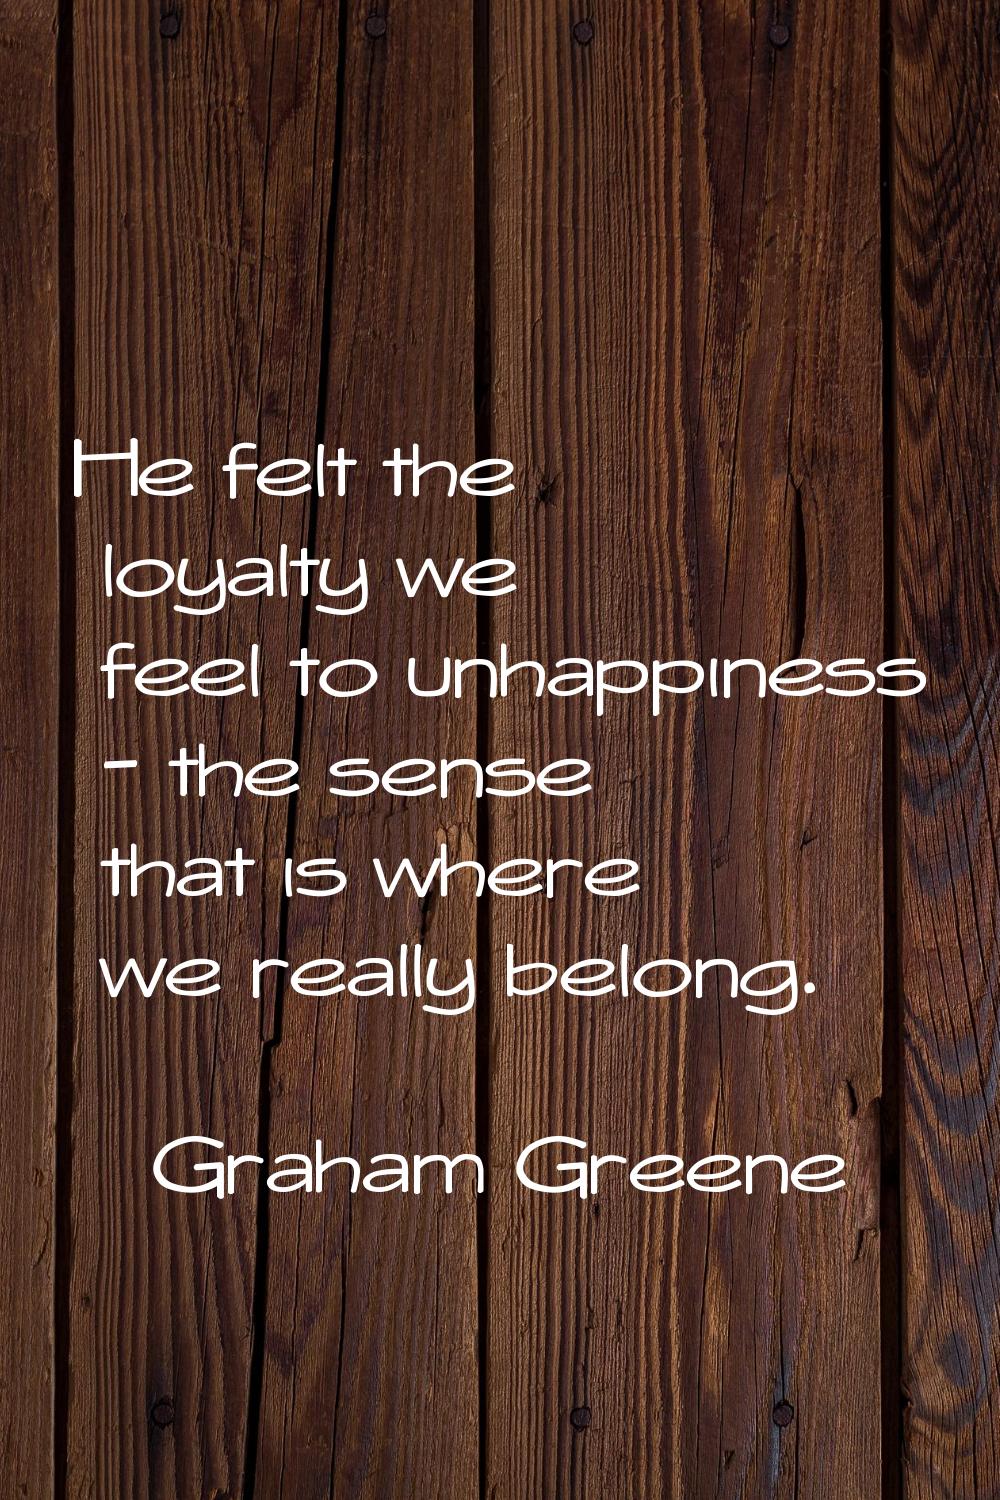 He felt the loyalty we feel to unhappiness - the sense that is where we really belong.